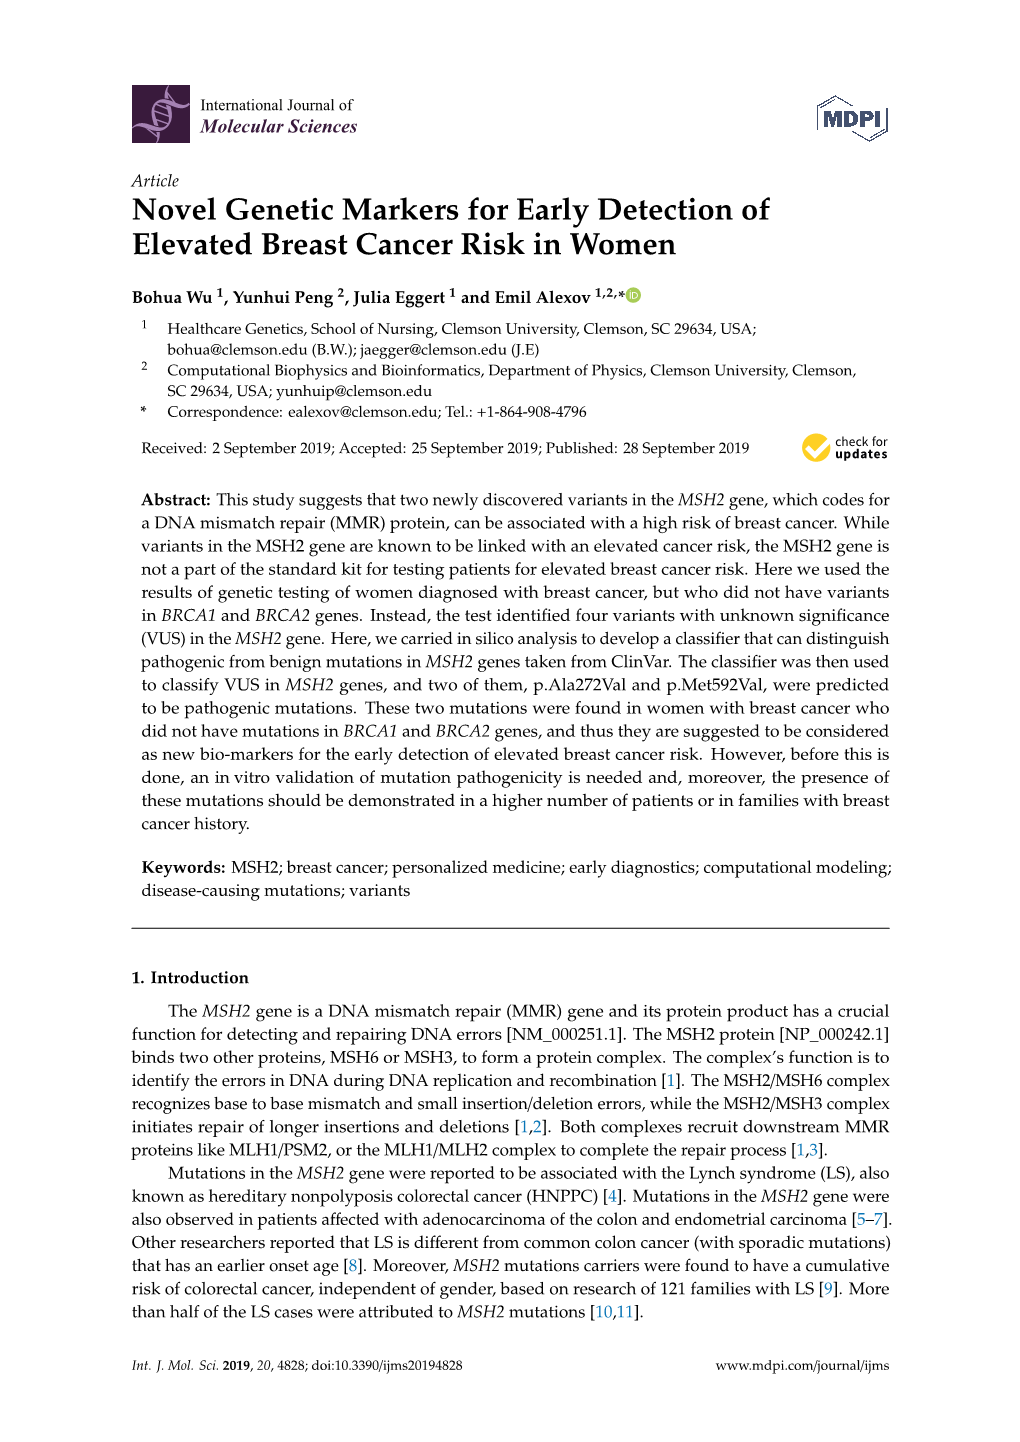 Novel Genetic Markers for Early Detection of Elevated Breast Cancer Risk in Women